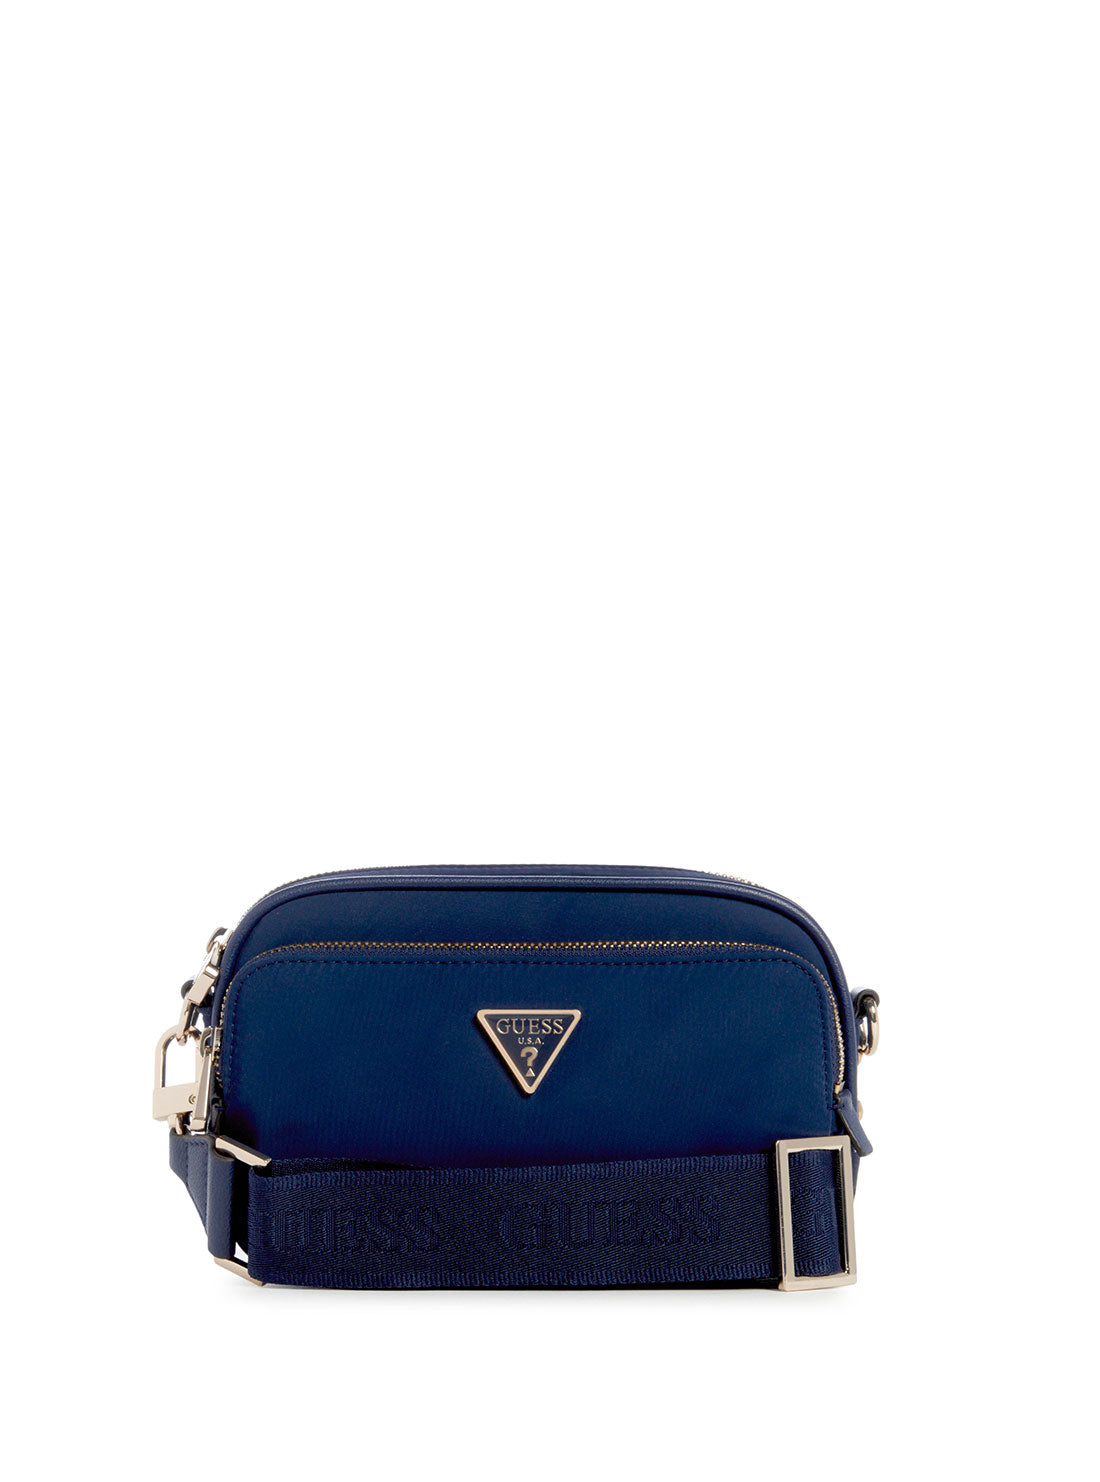 GUESS Eco Navy Gemma Crossbody Bag front view